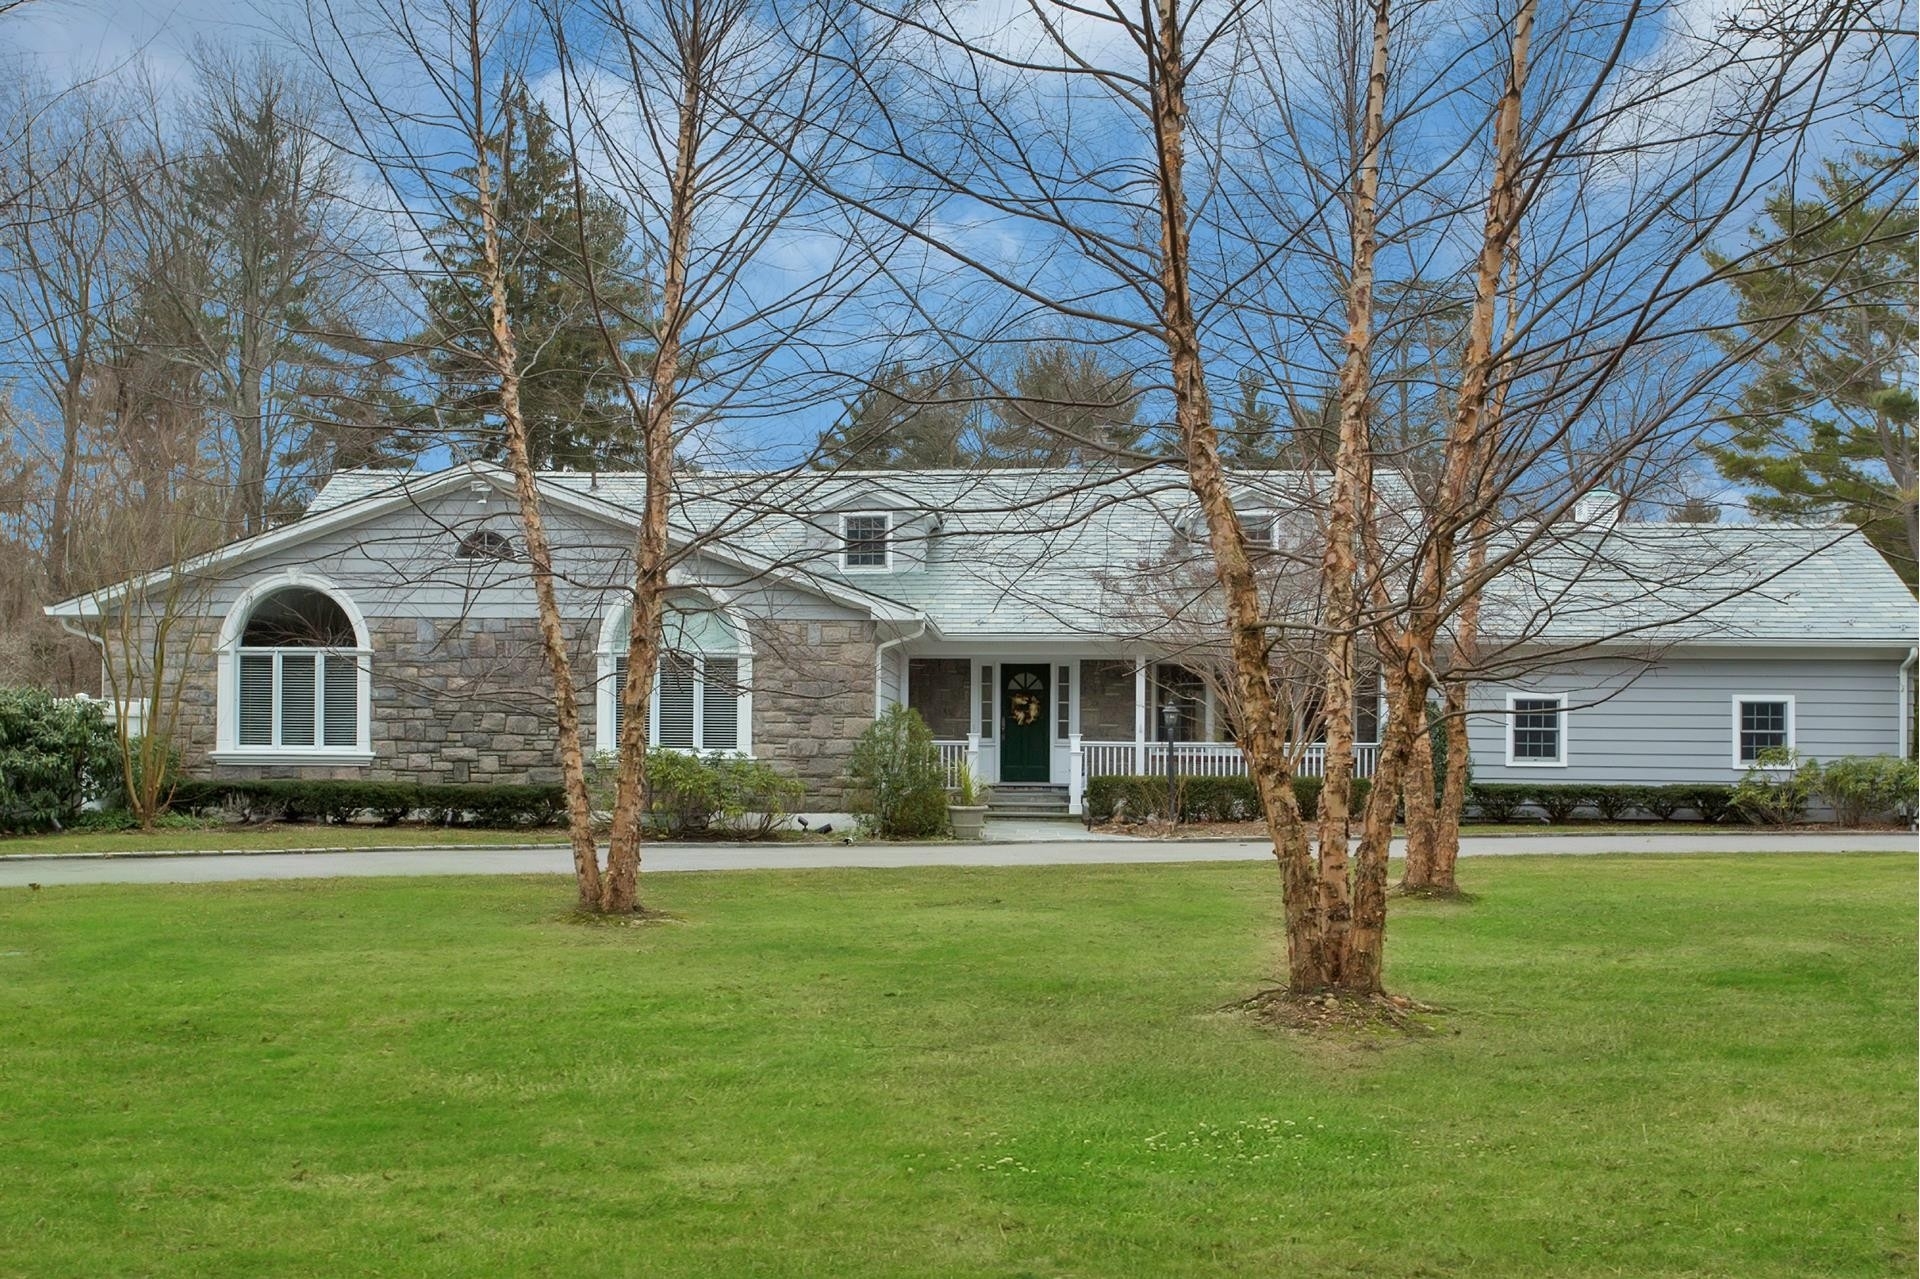 Single Family Home at Old Westbury